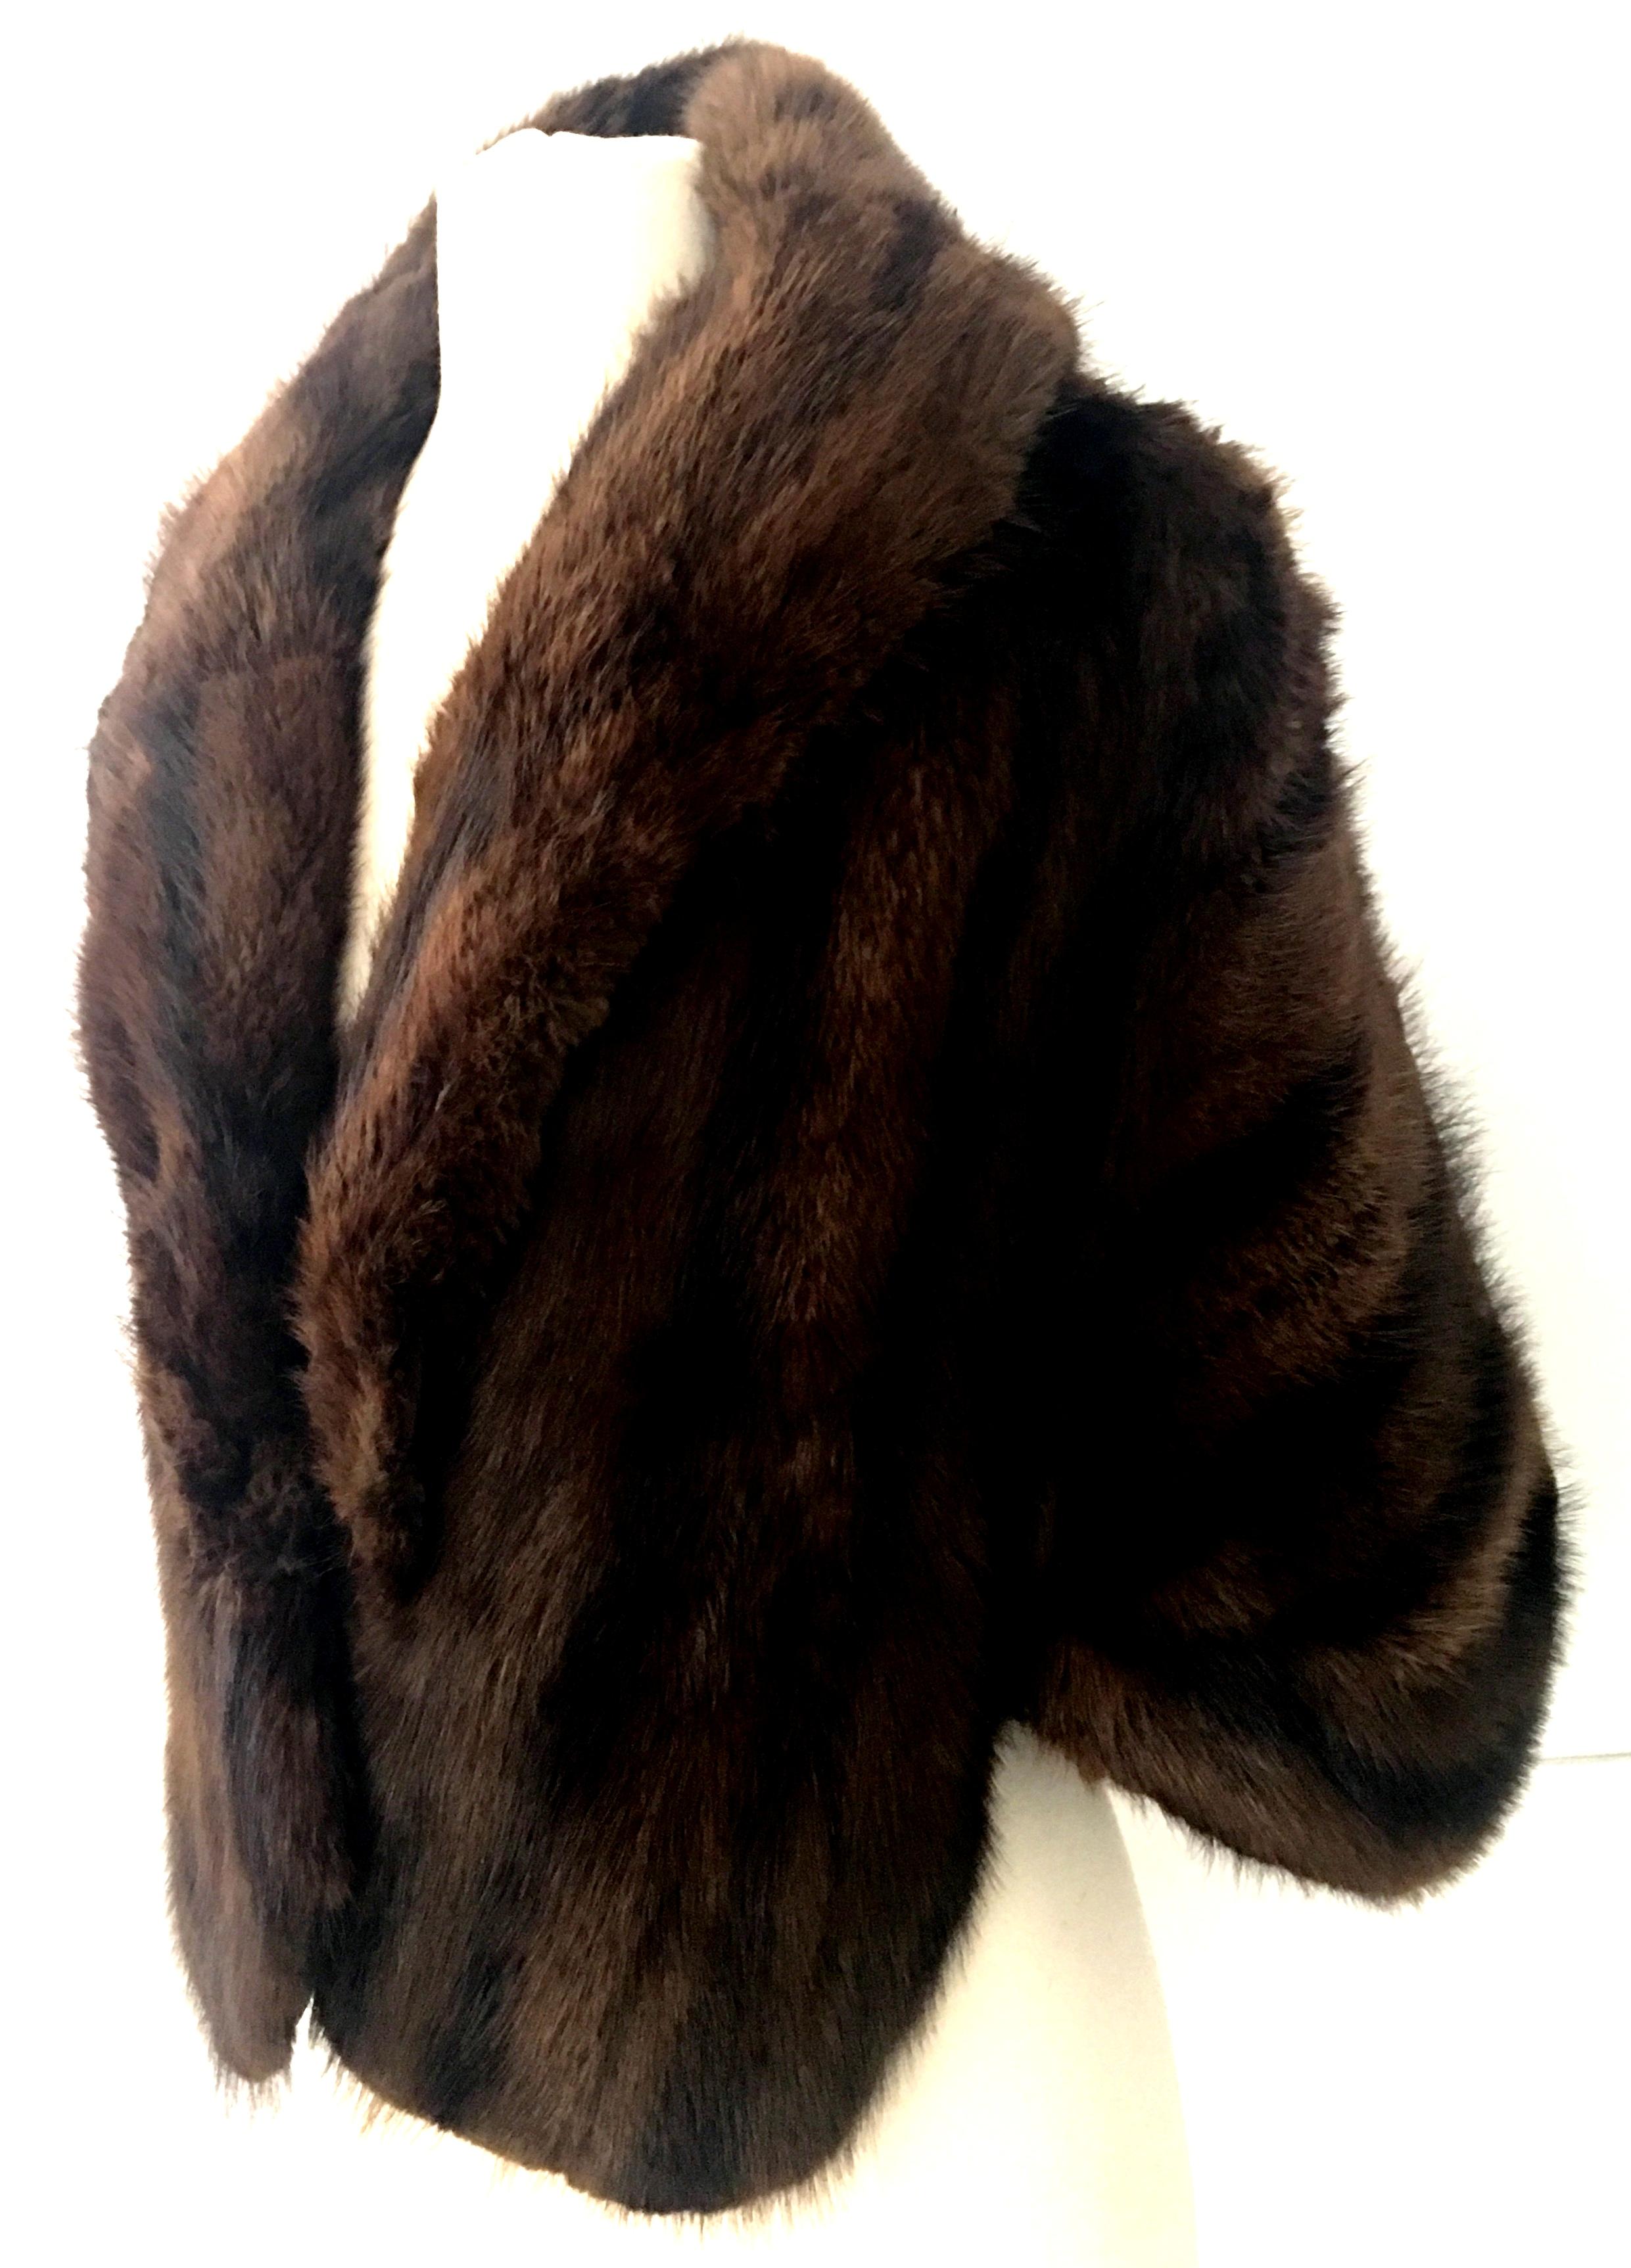 1960'S Mink  Fur Capelet-Jackiet in chocolate & black stripe. This fine quality high sheen soft and luxurious mink capelet features a generous roll over collar and two exterior side pockets. Fully lined with the original furrier tag in tact, Joeseph